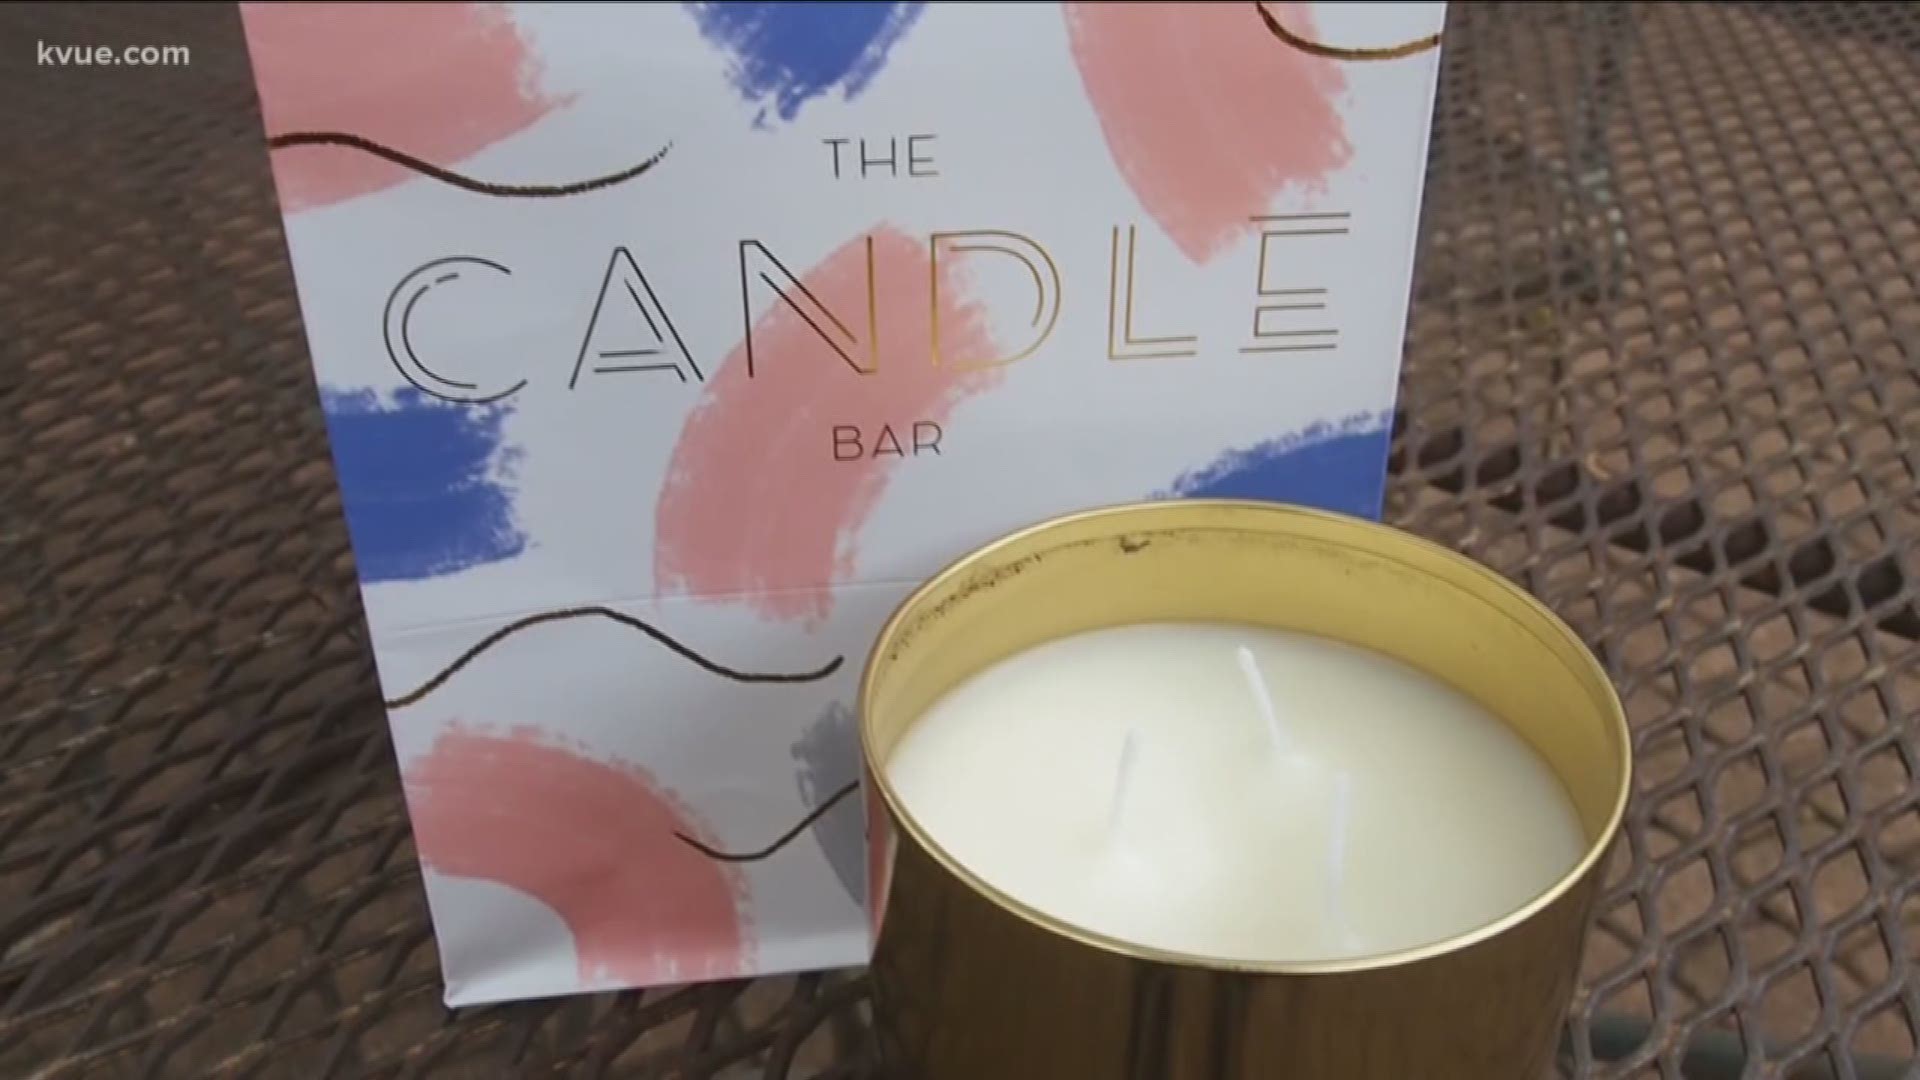 The new Candle Bar allows you to create your own candles at the Domain Northside.